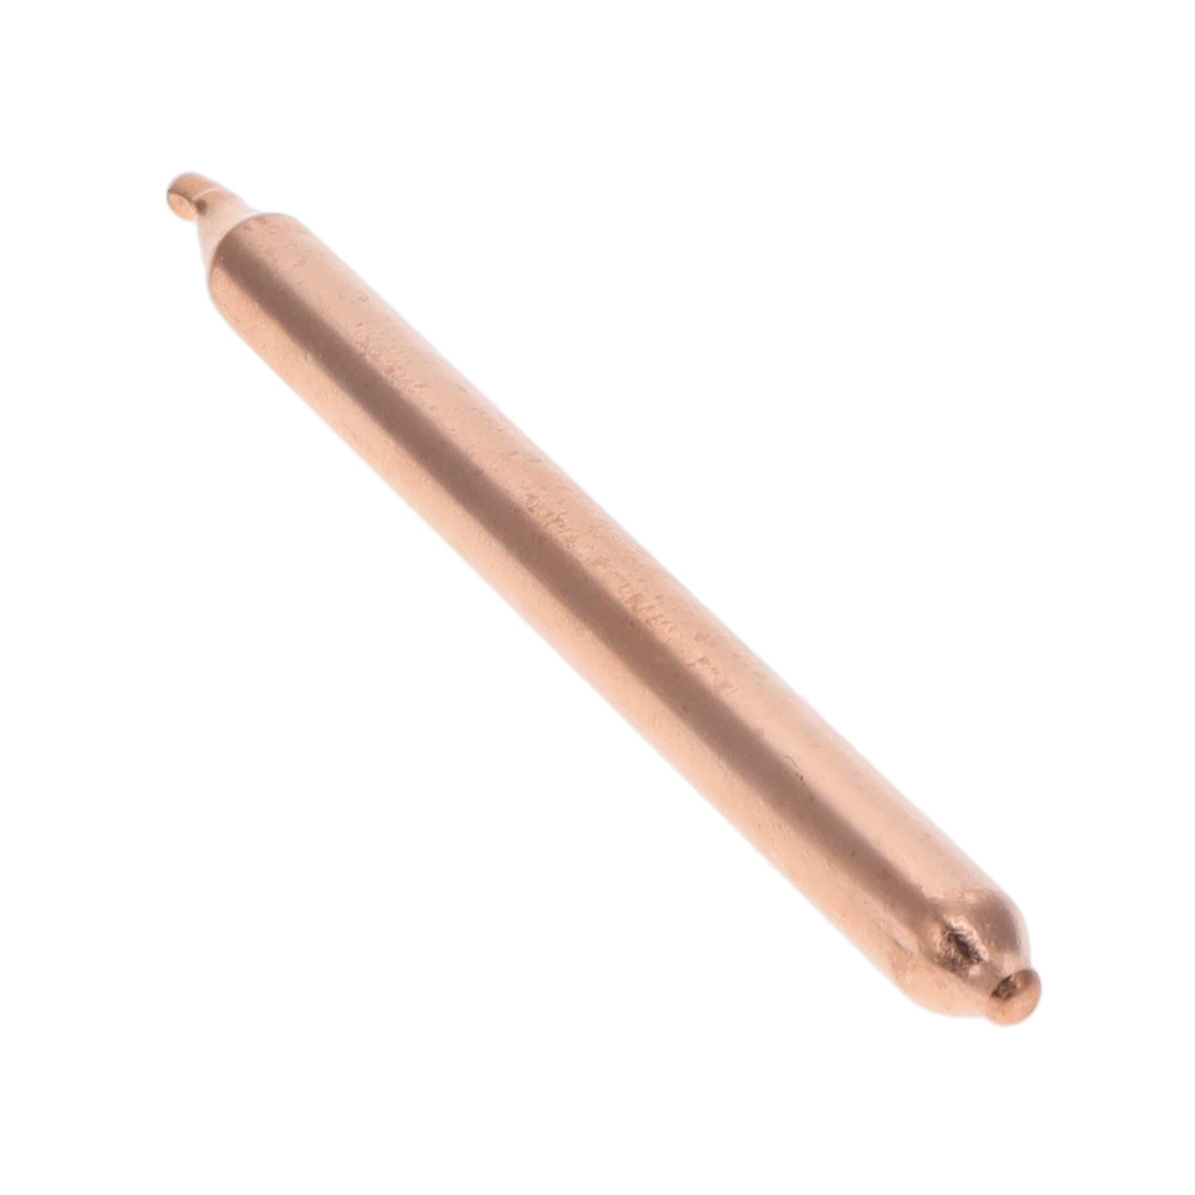 【HP-CWS-R08-100-N】COPPER-WATER HEAT PIPE, ROUND, D